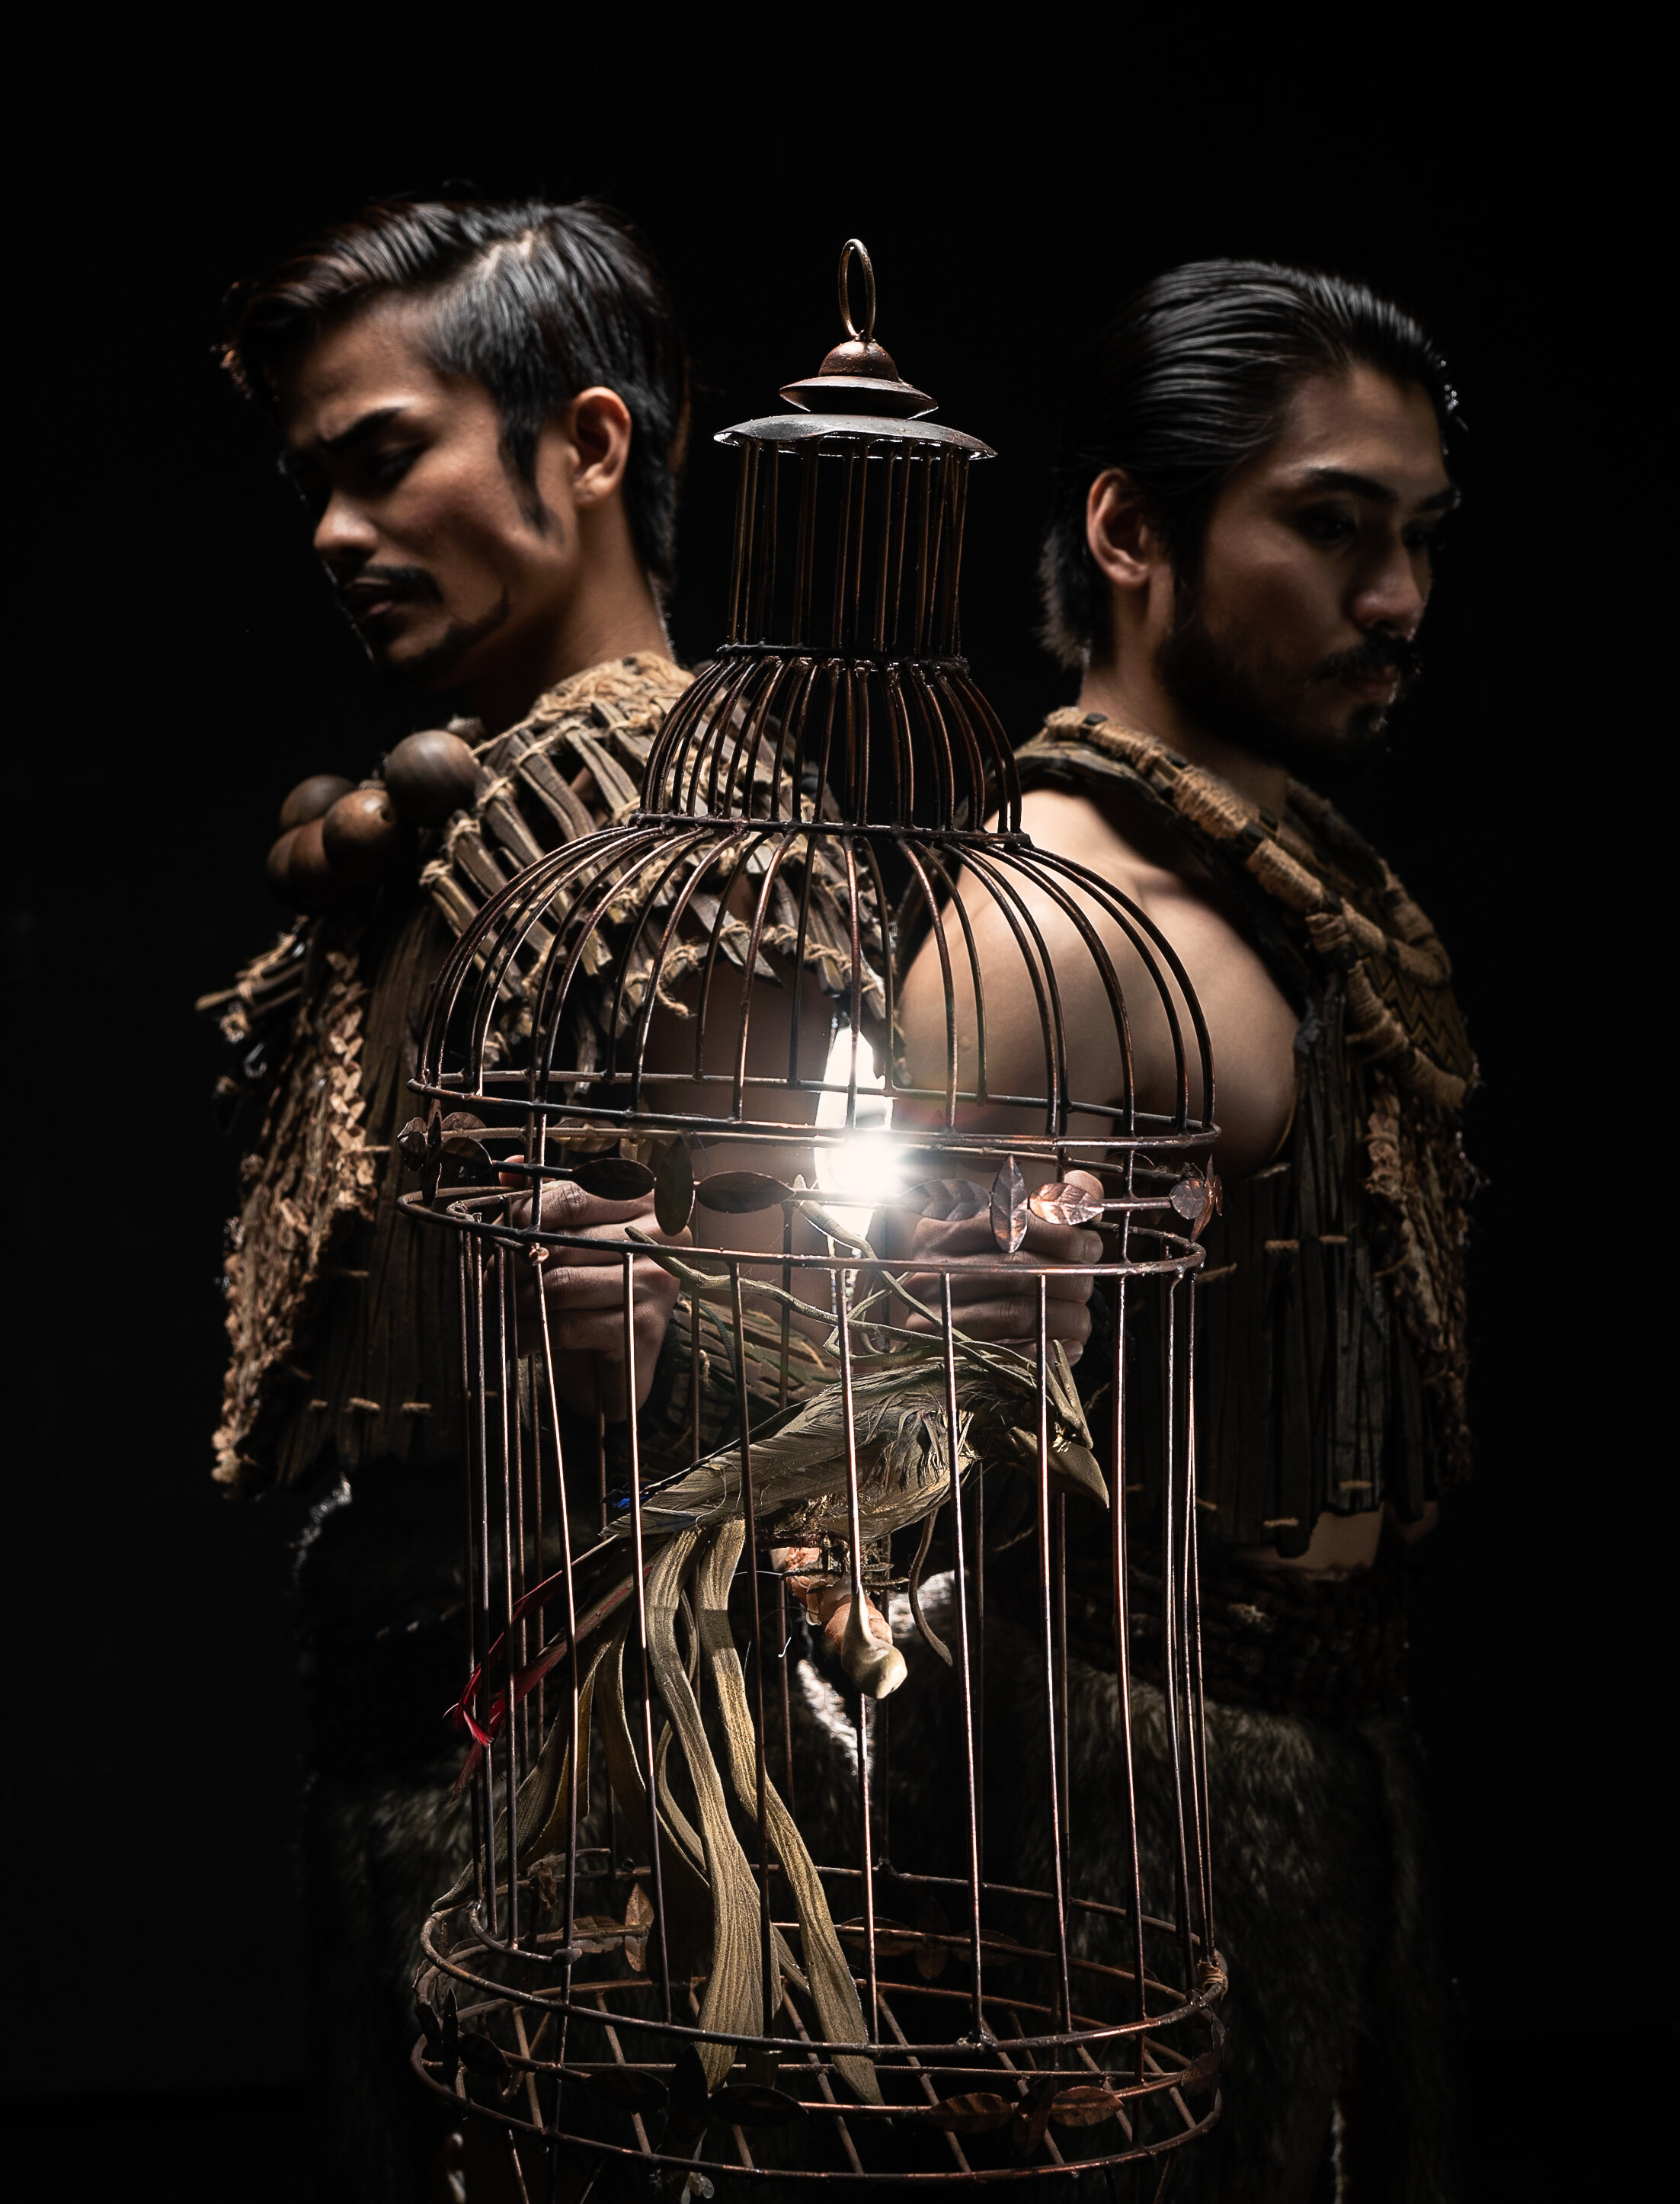  Diego and Pedro secure the Adarna and head home, leaving their brother behind. But the bird remains silent before the king. Photo courtesy of MarBi Photography and Project Art, Inc. 